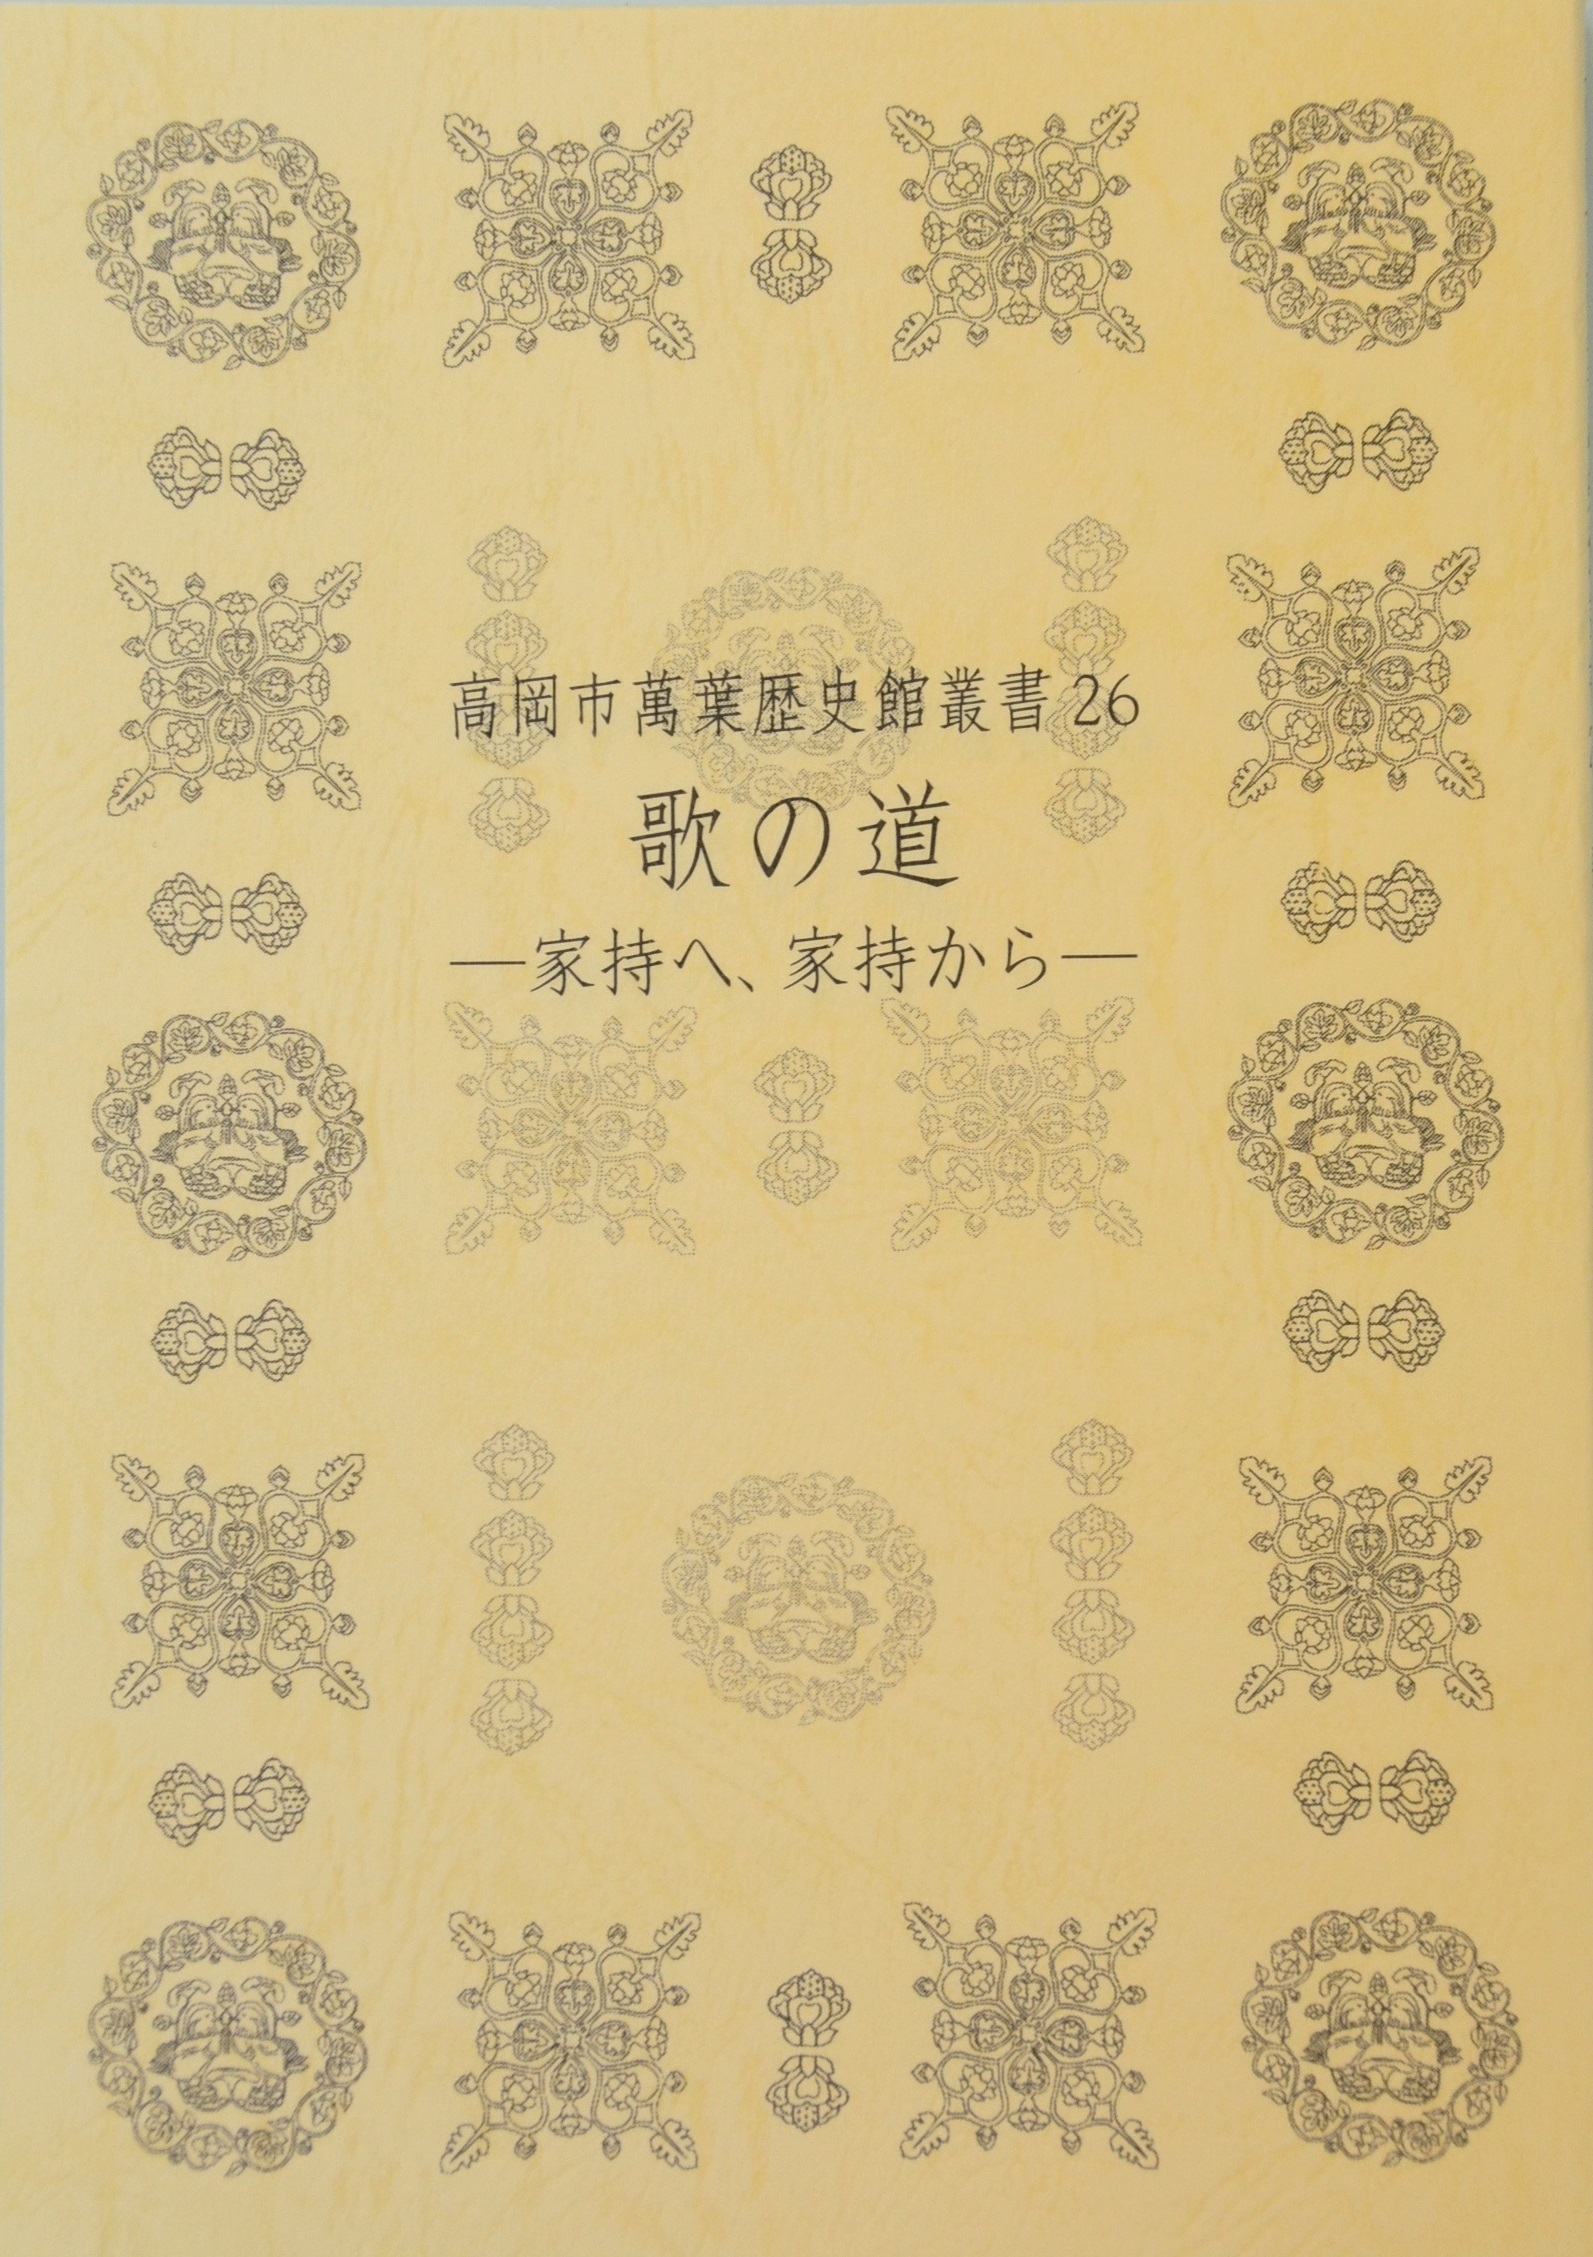 Bright golden yellow cover with decorative elements